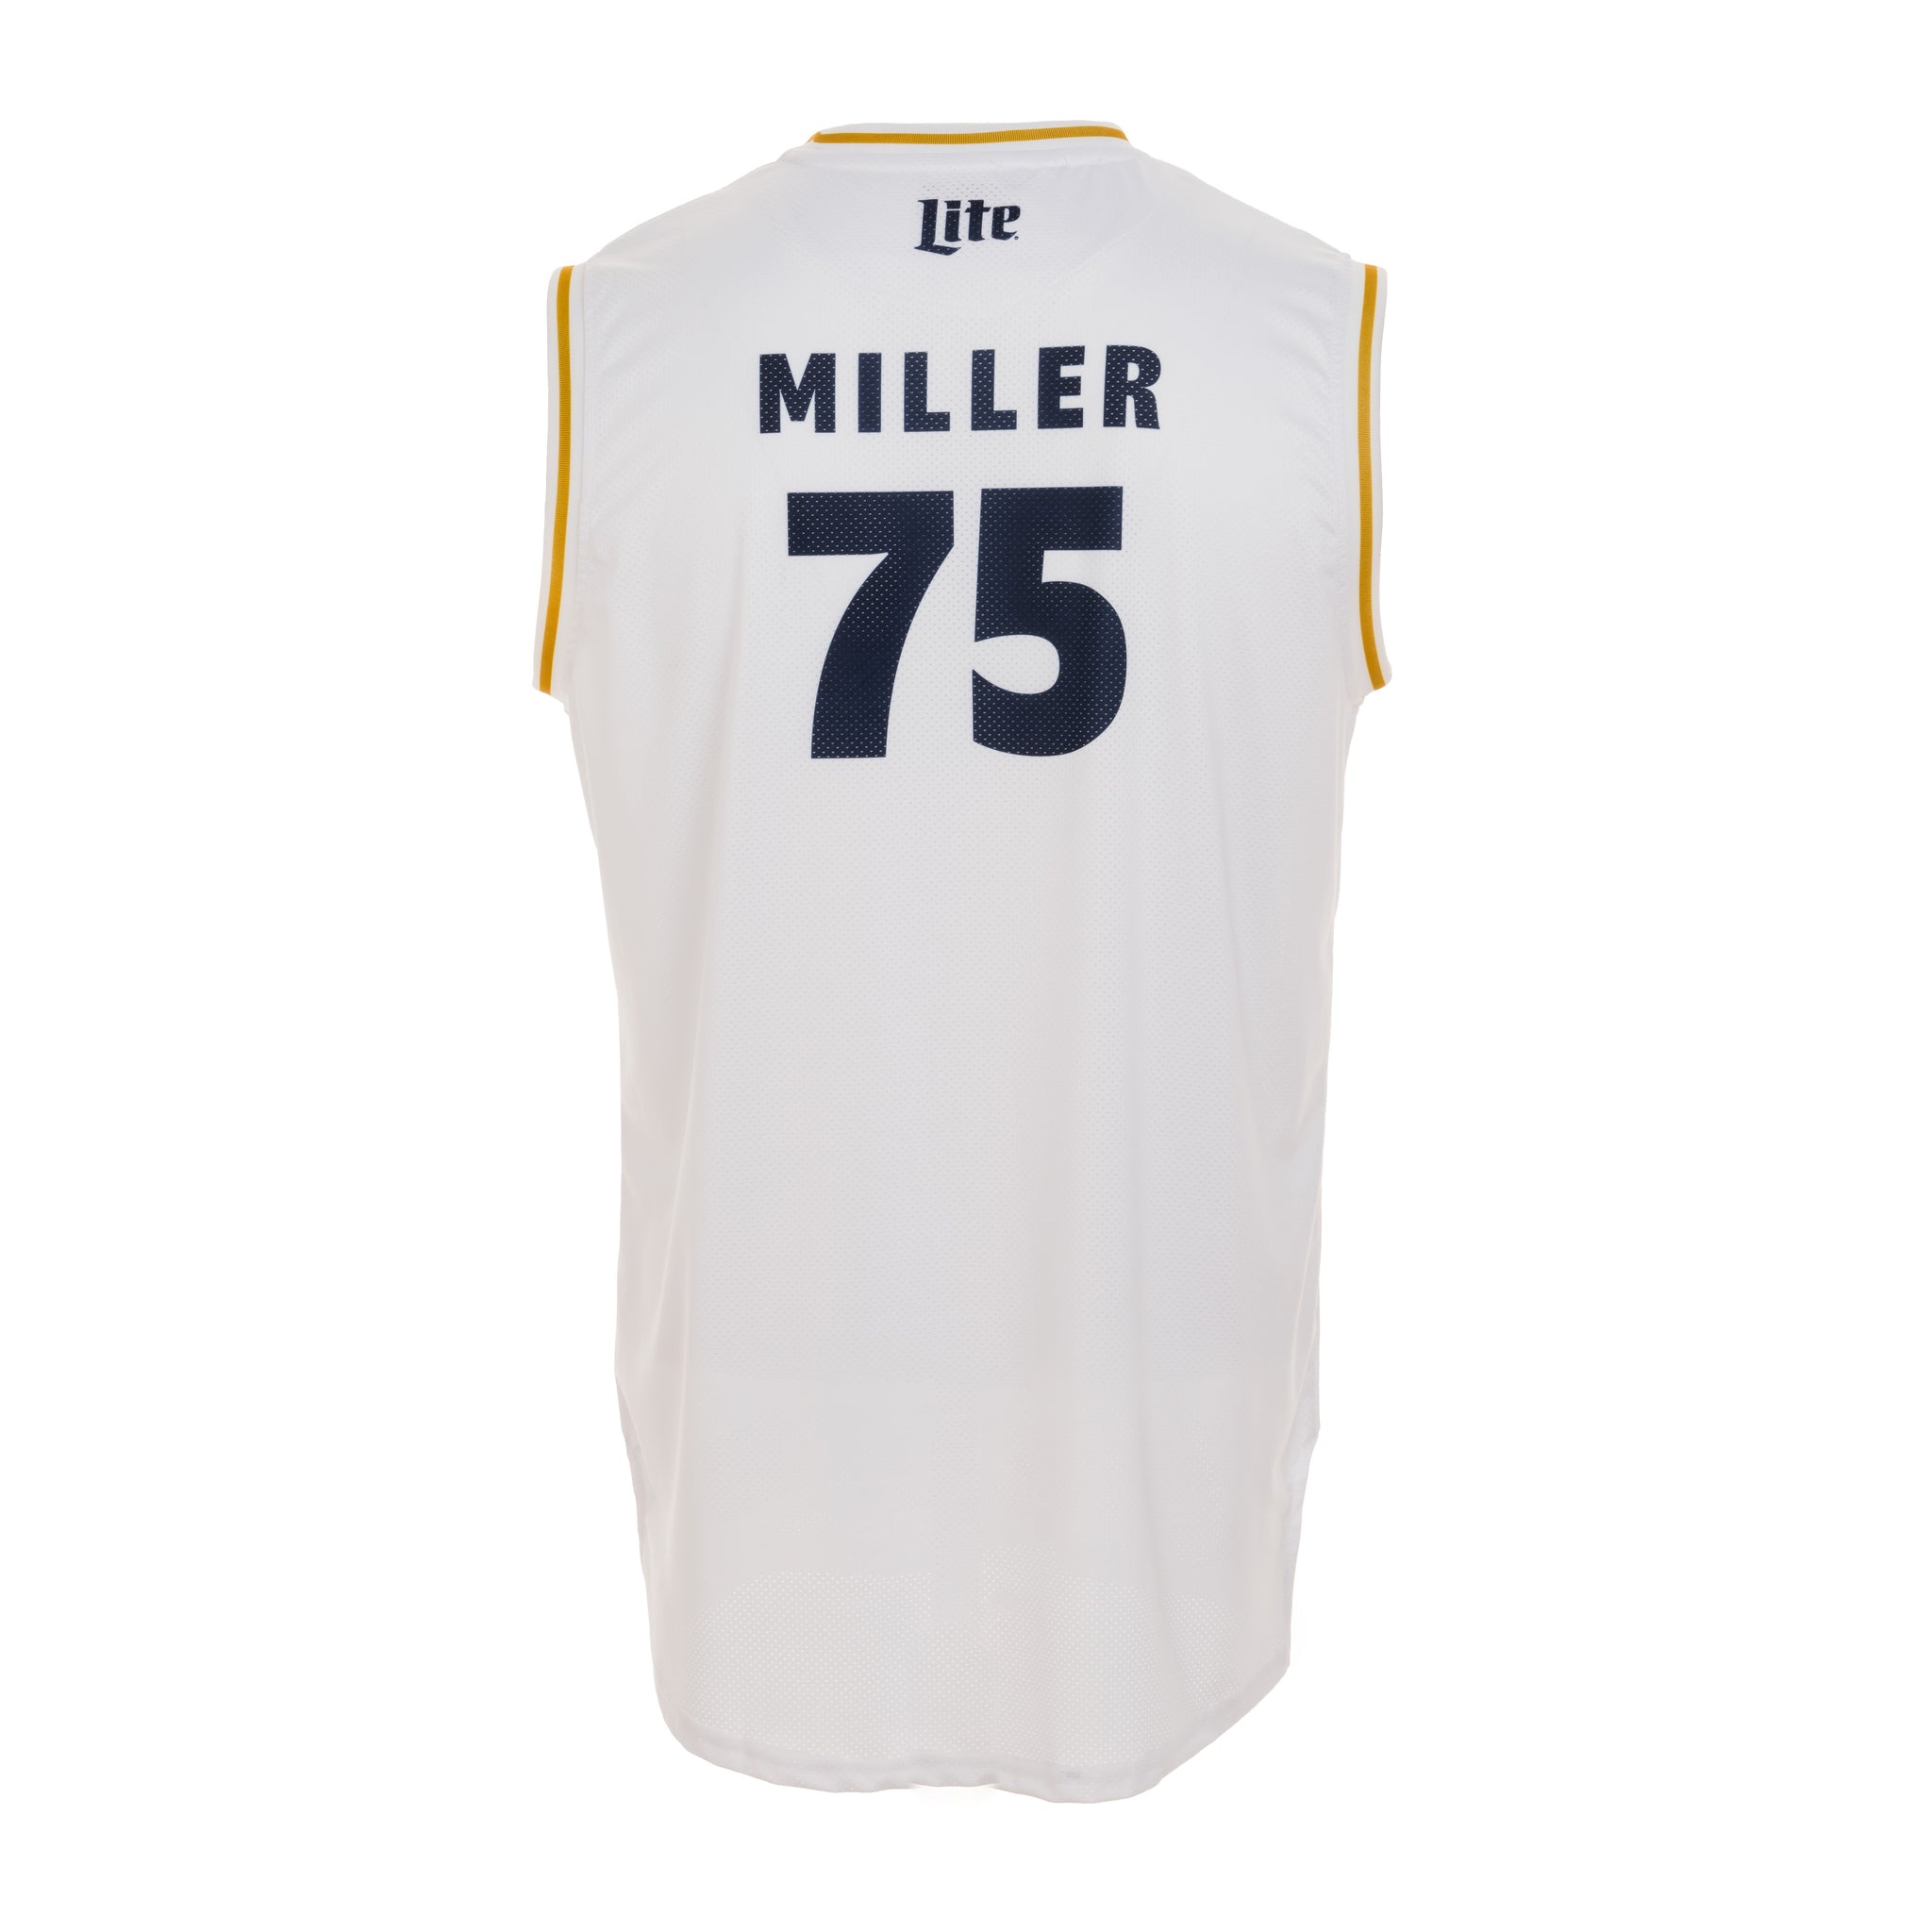 where to buy a basketball jersey near me